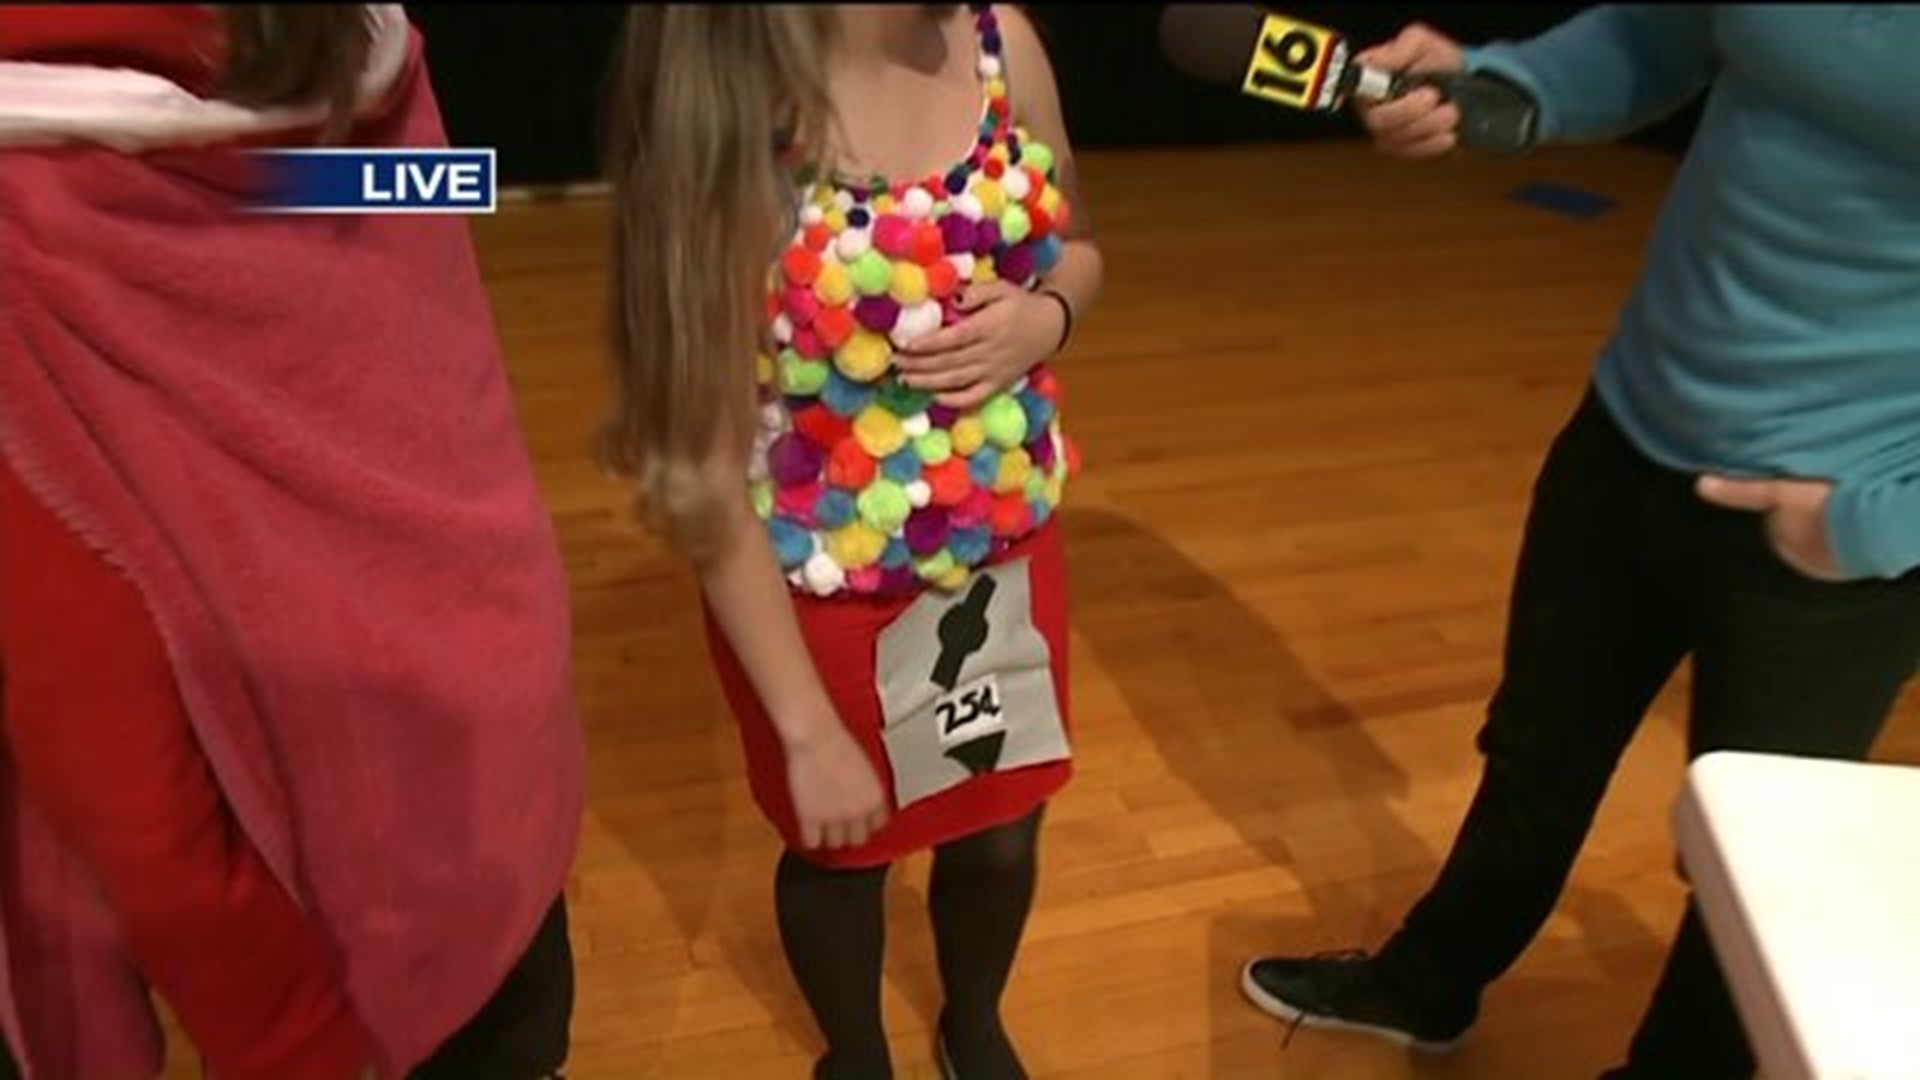 DIY Costume: Gumball Machine & Red Solo Cup